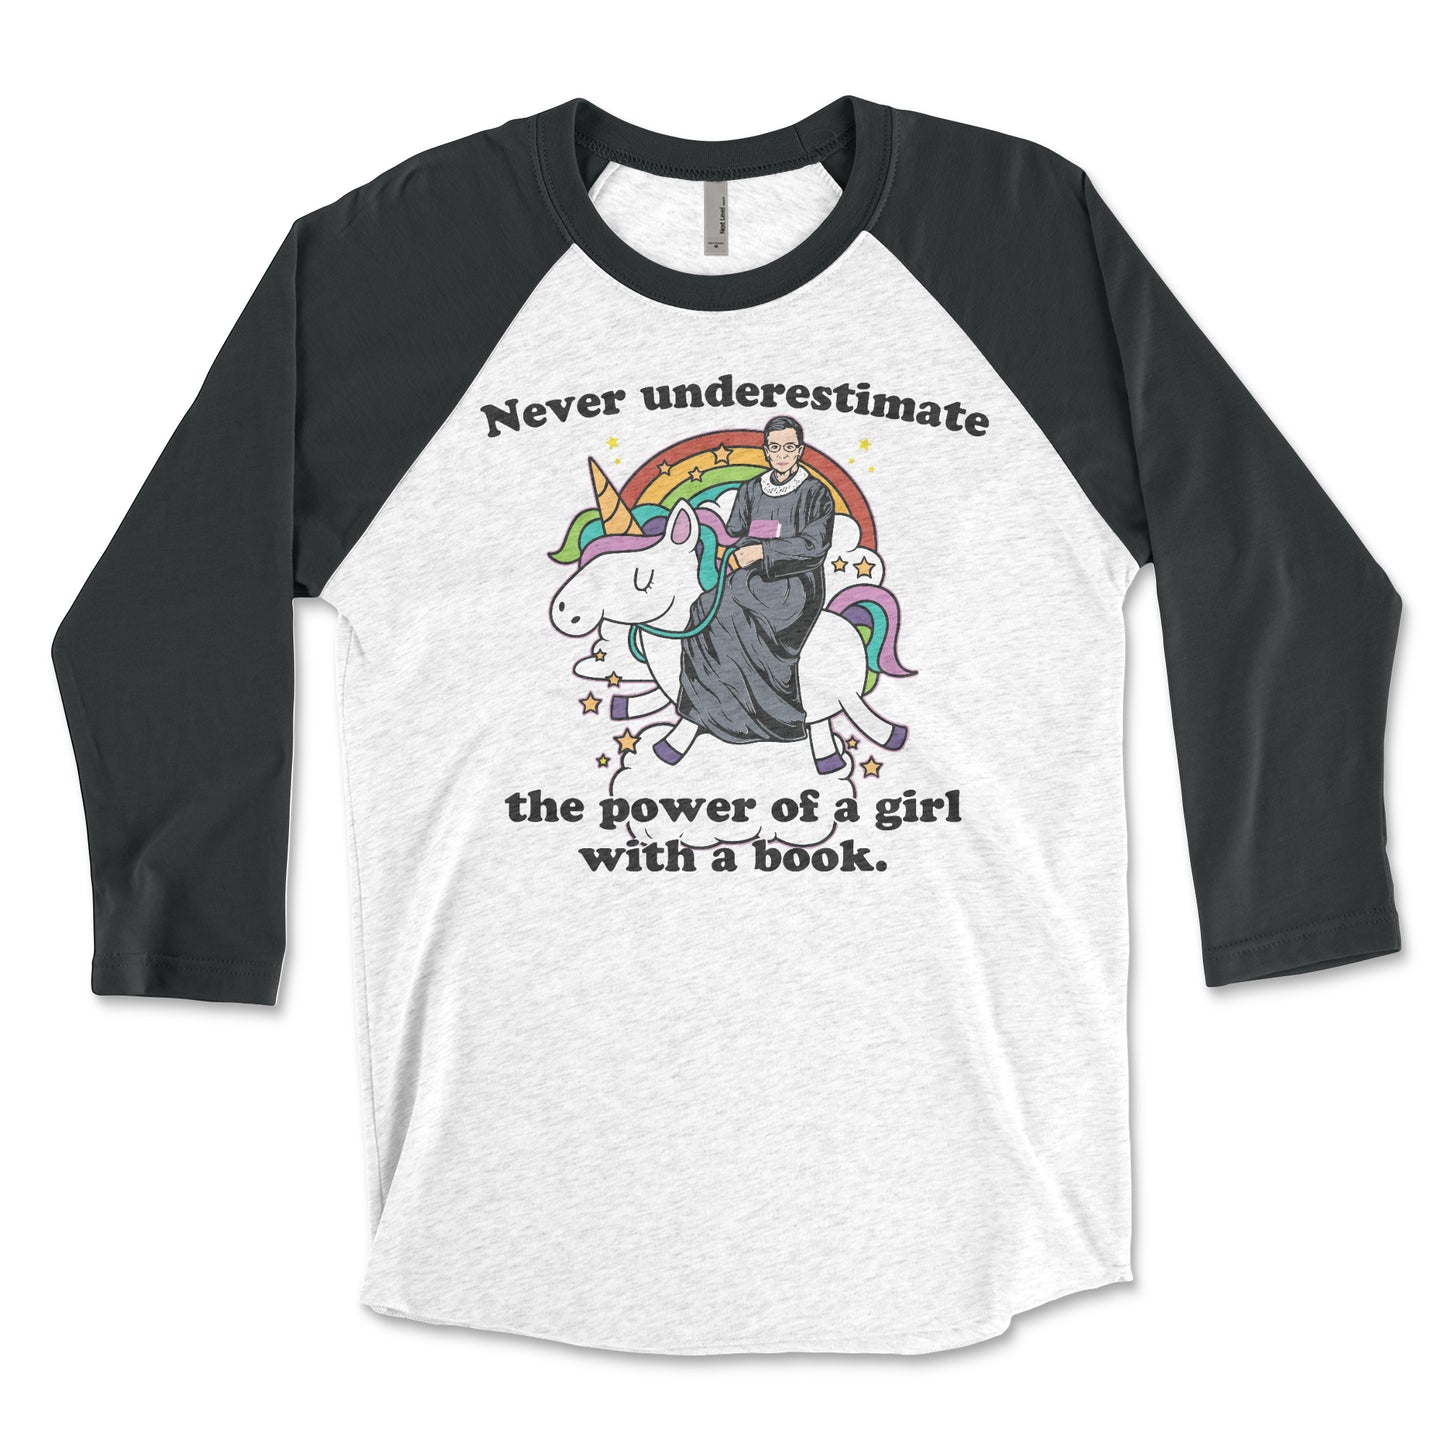 Never Underestimate the Power of a Girl with a Book RGB Unicorn 3/4 Sleeve Raglan T-shirt